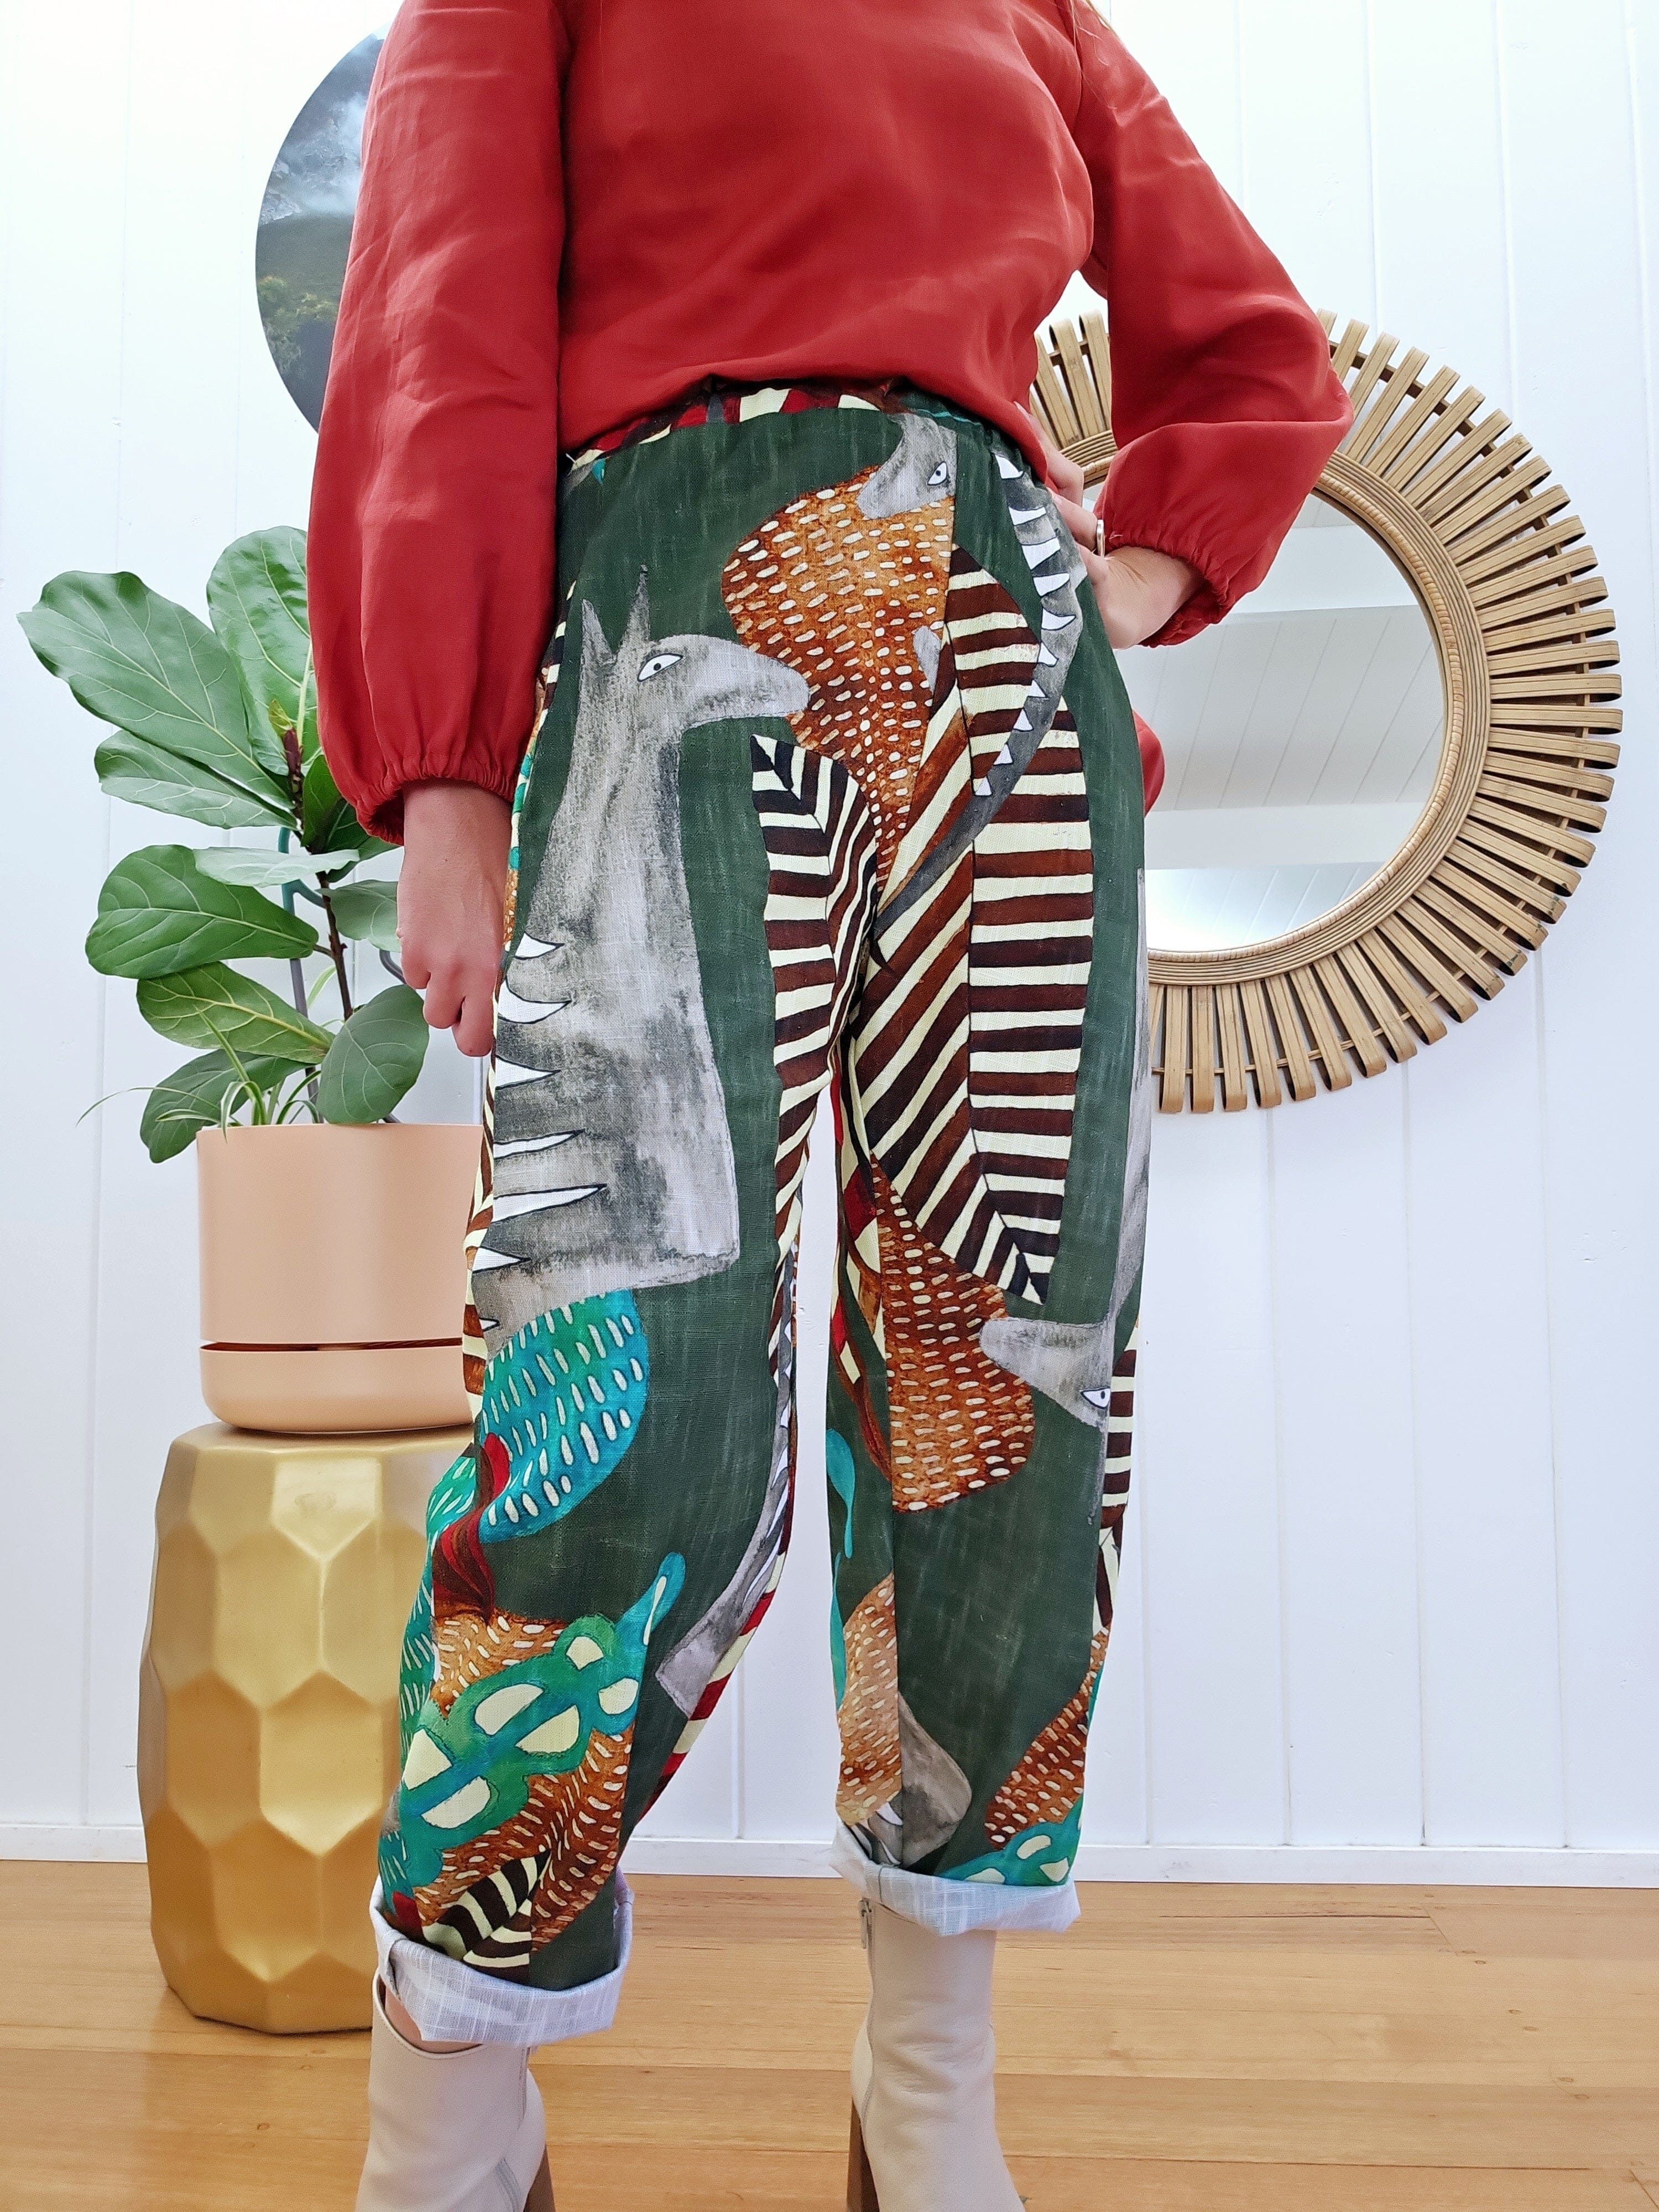 Bob Pant Linen/Hemp - Lost Thylacine Pants The Spotted Quoll 